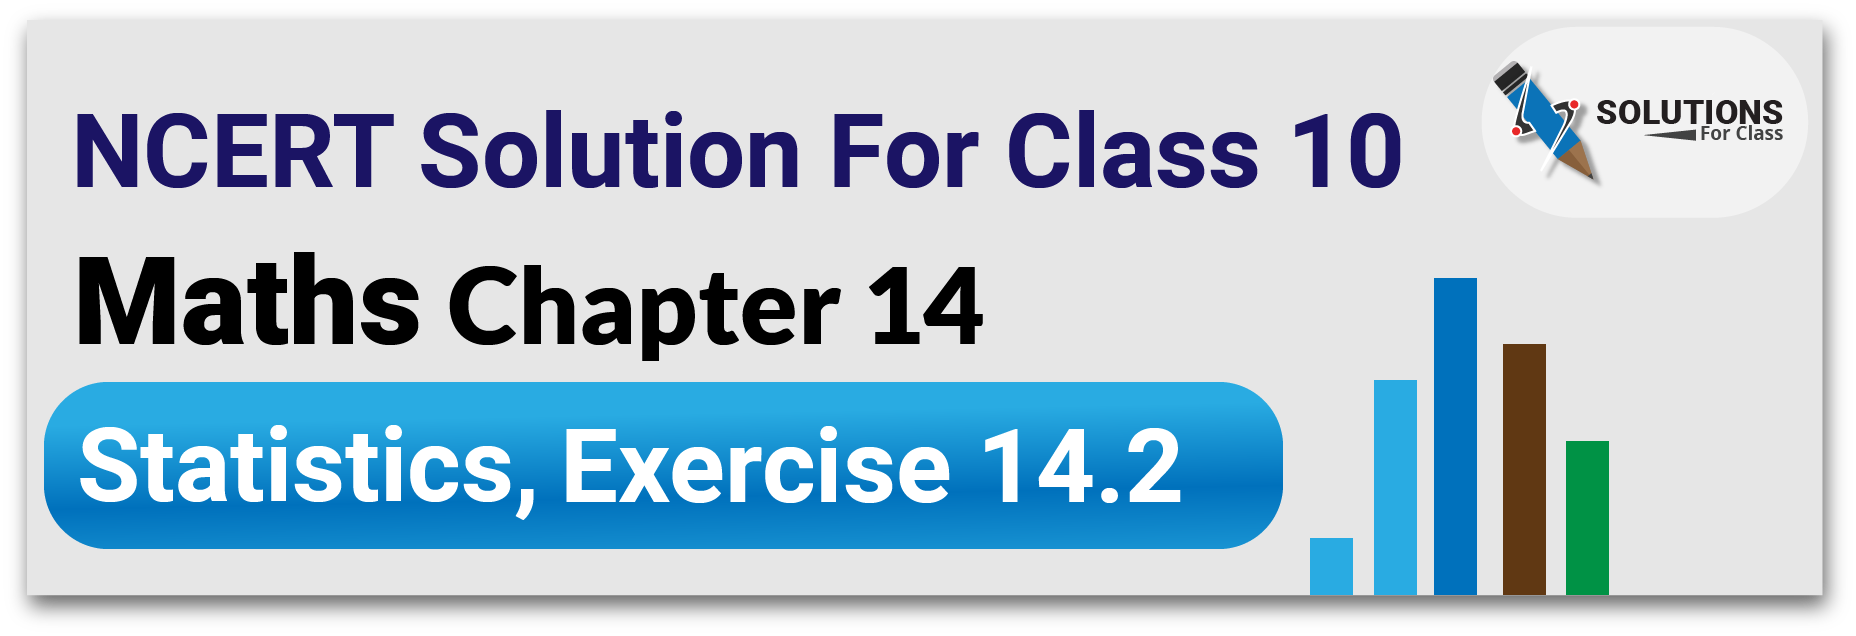 NCERT Solutions For Class 10, Maths, Chapter 14, Statistics, Exercise 14.2